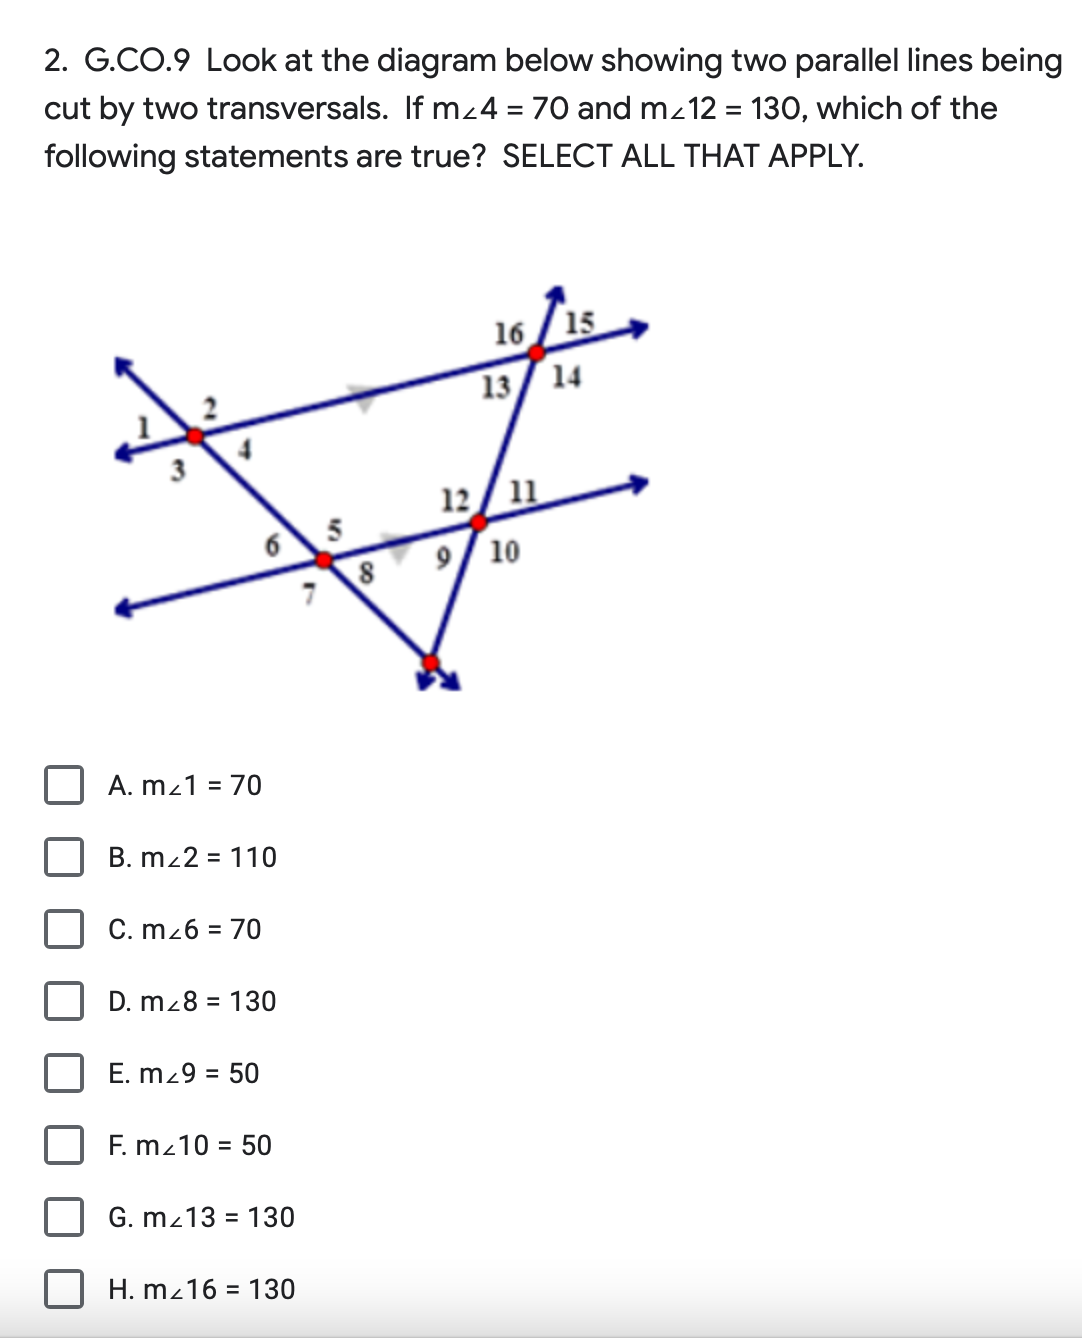 2. G.CO.9 Look at the diagram below showing two parallel lines being
cut by two transversals. If m<4 = 70 and m/12 = 130, which of the
following statements are true? SELECT ALL THAT APPLY.
A. m/1 = 70
B. m/2 = 110
C. m²6 = 70
6
D. m28 = 130
E. m29 = 50
F. m/10 = 50
G. m/13 = 130
H. m2 16 130
8
7
*
16 15
13 14
12 11
9 10